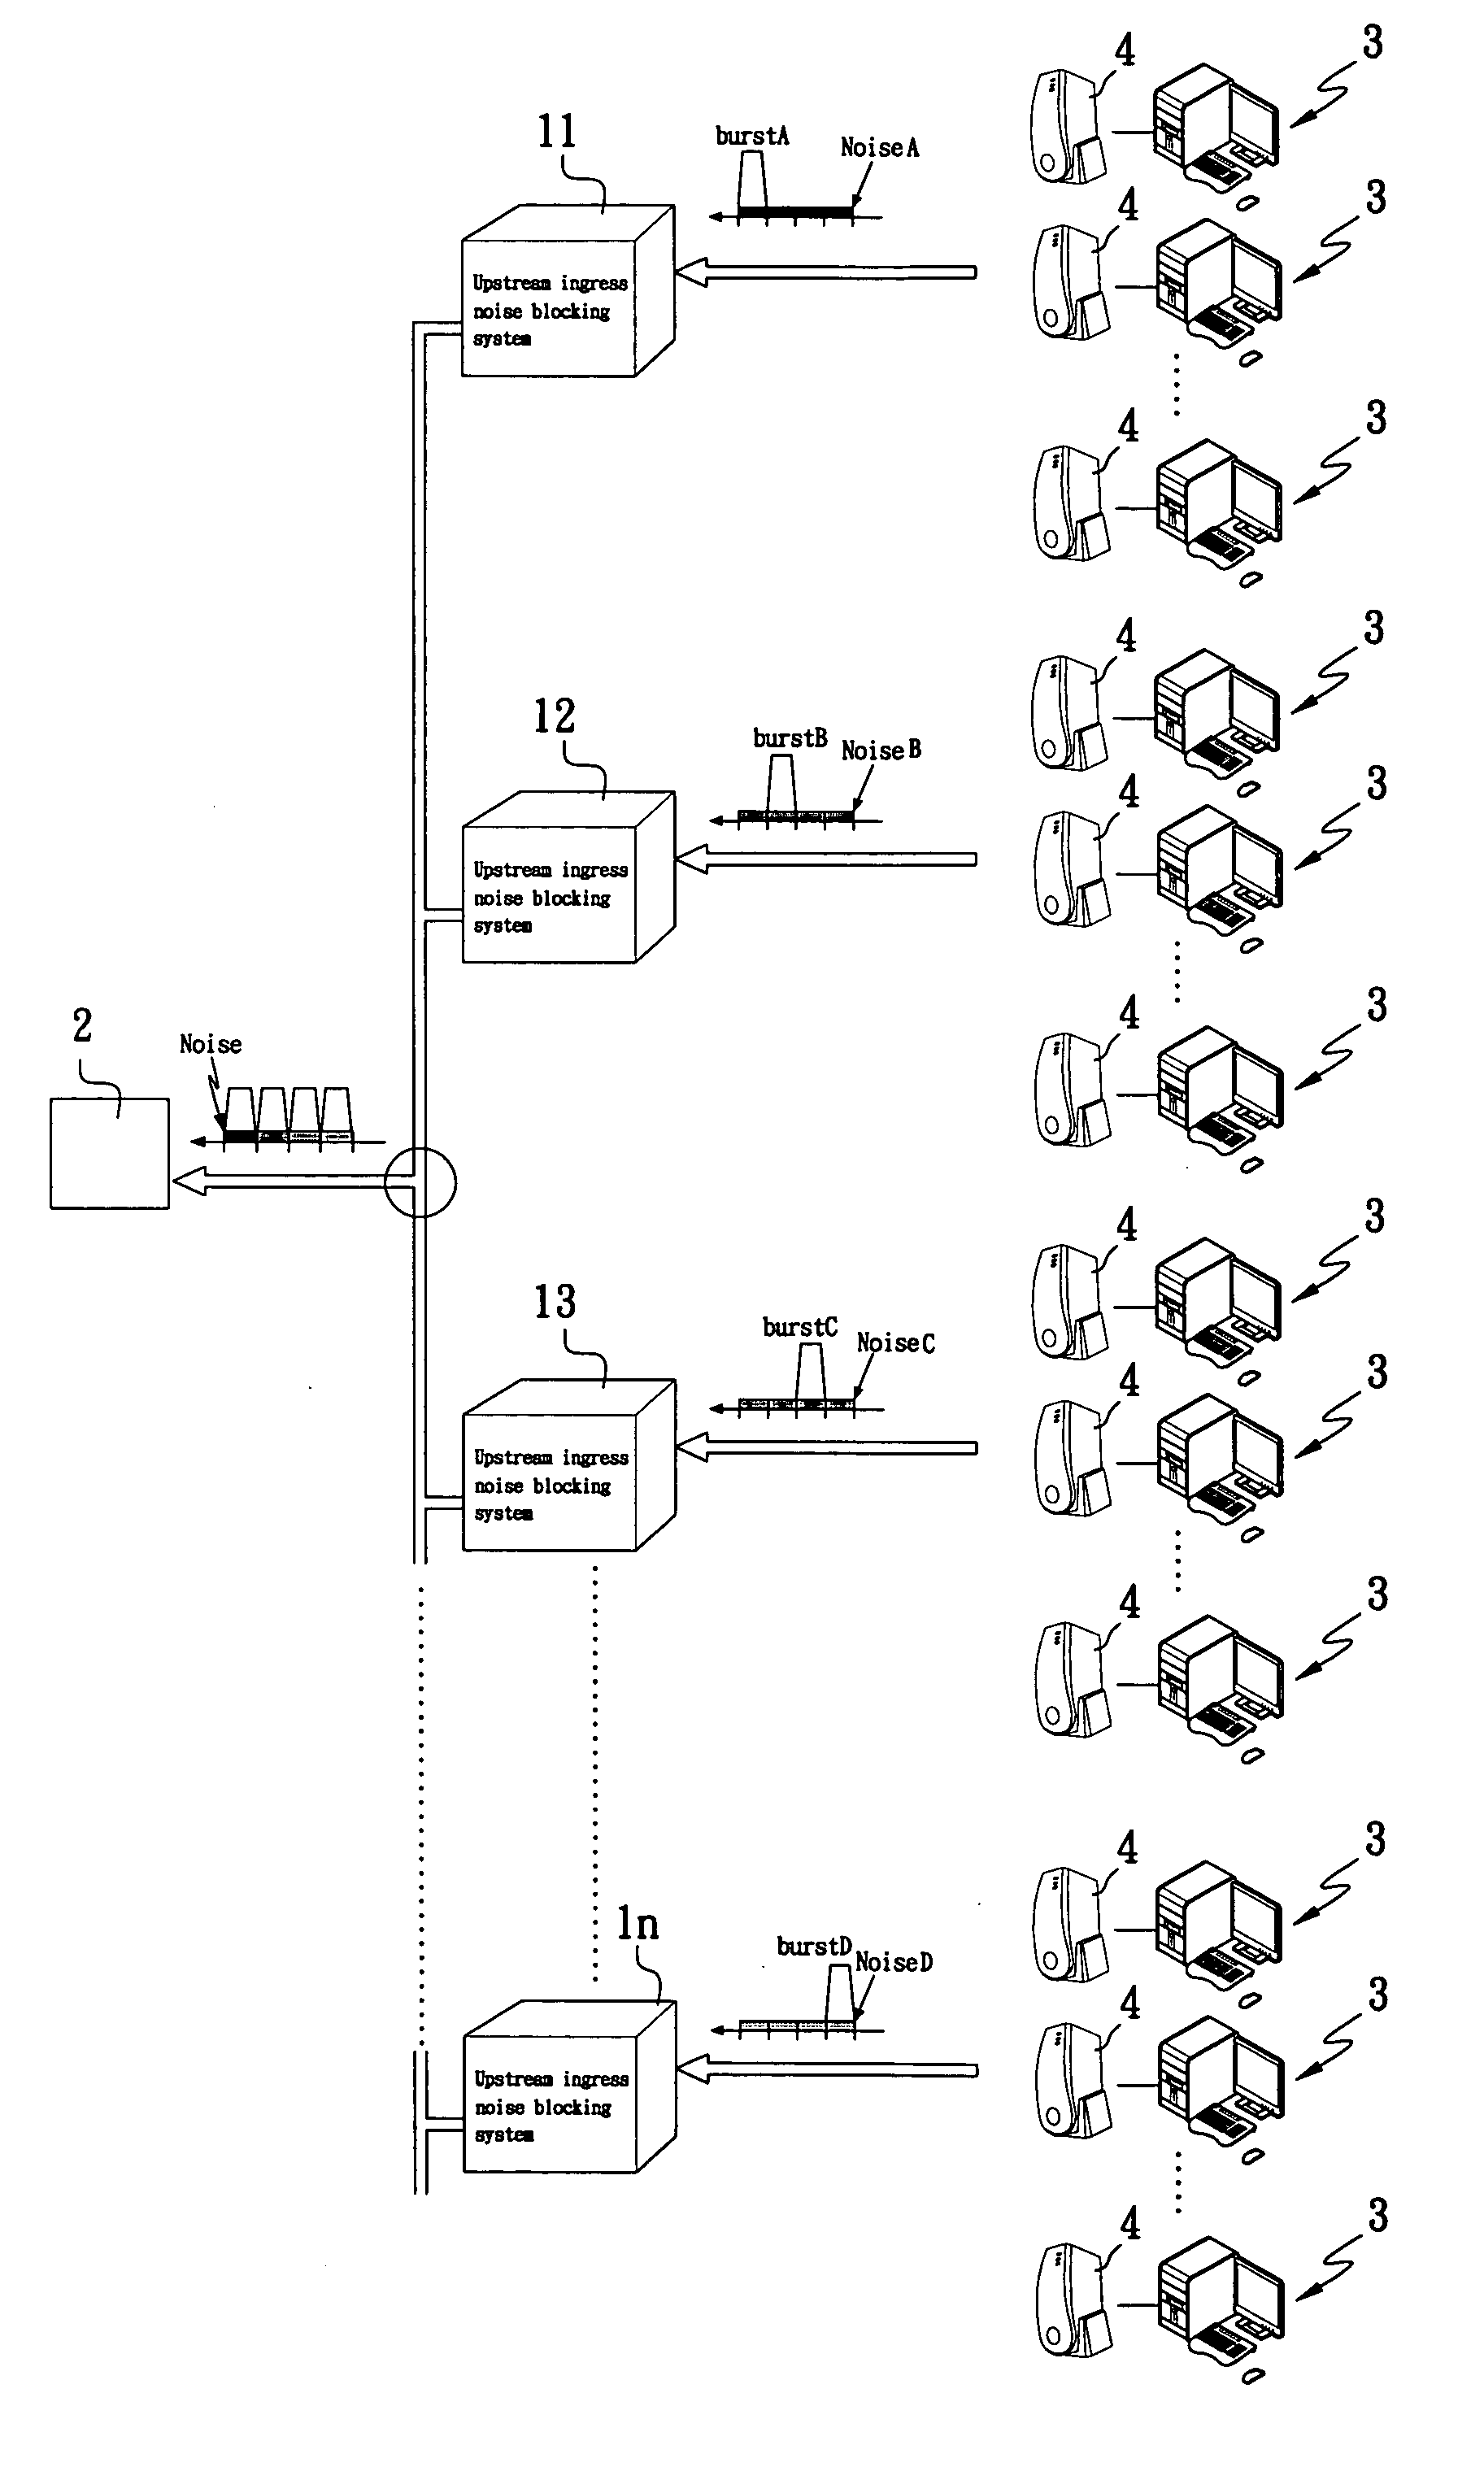 Method of reducing upstream ingress noise in cable data system